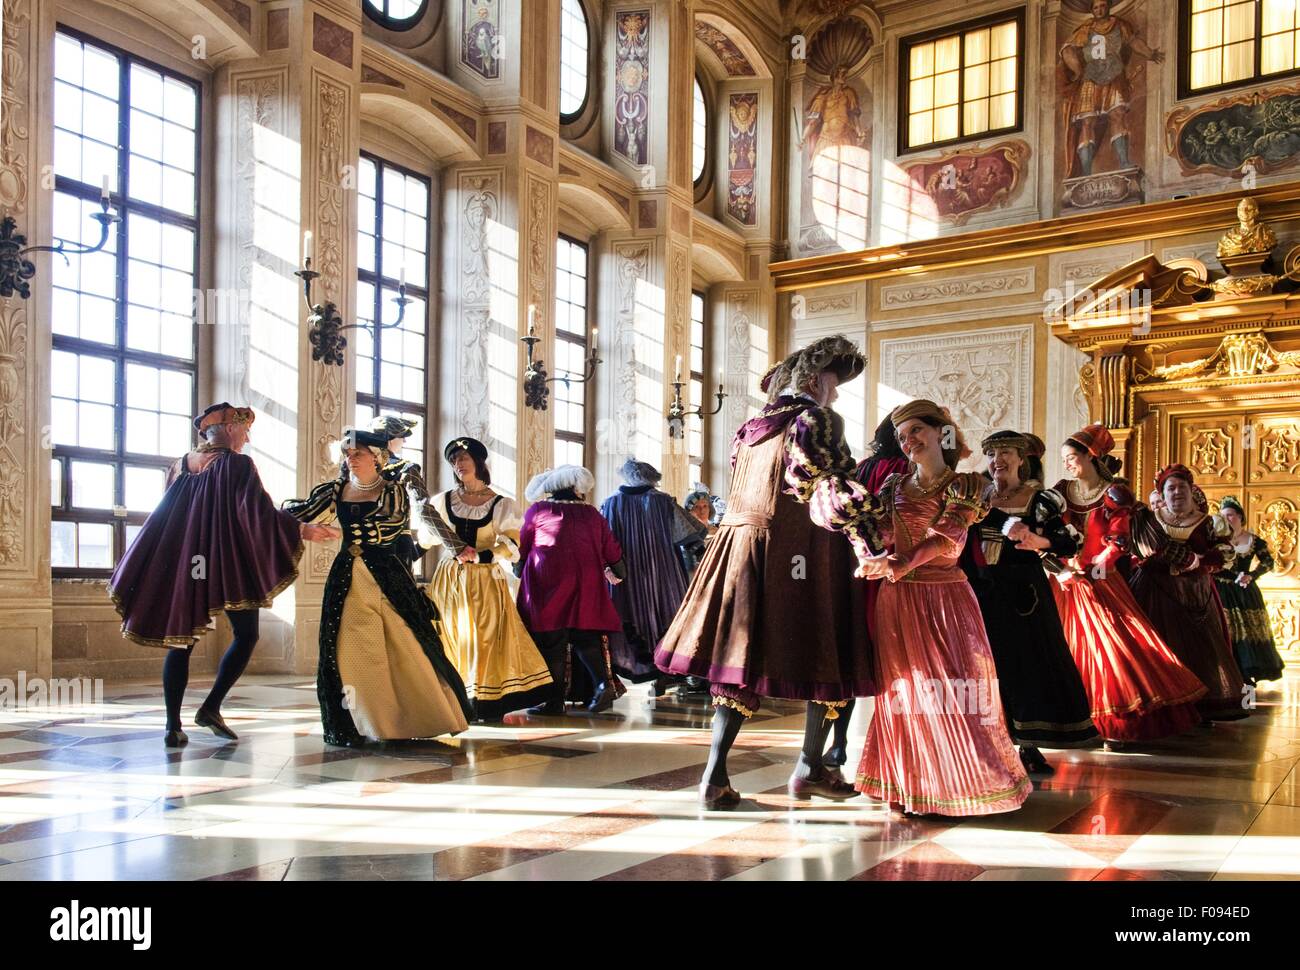 Couples dancing in Golden Hall at Augsburg Town Hall, Augsburg, Bavaria, Germany Stock Photo